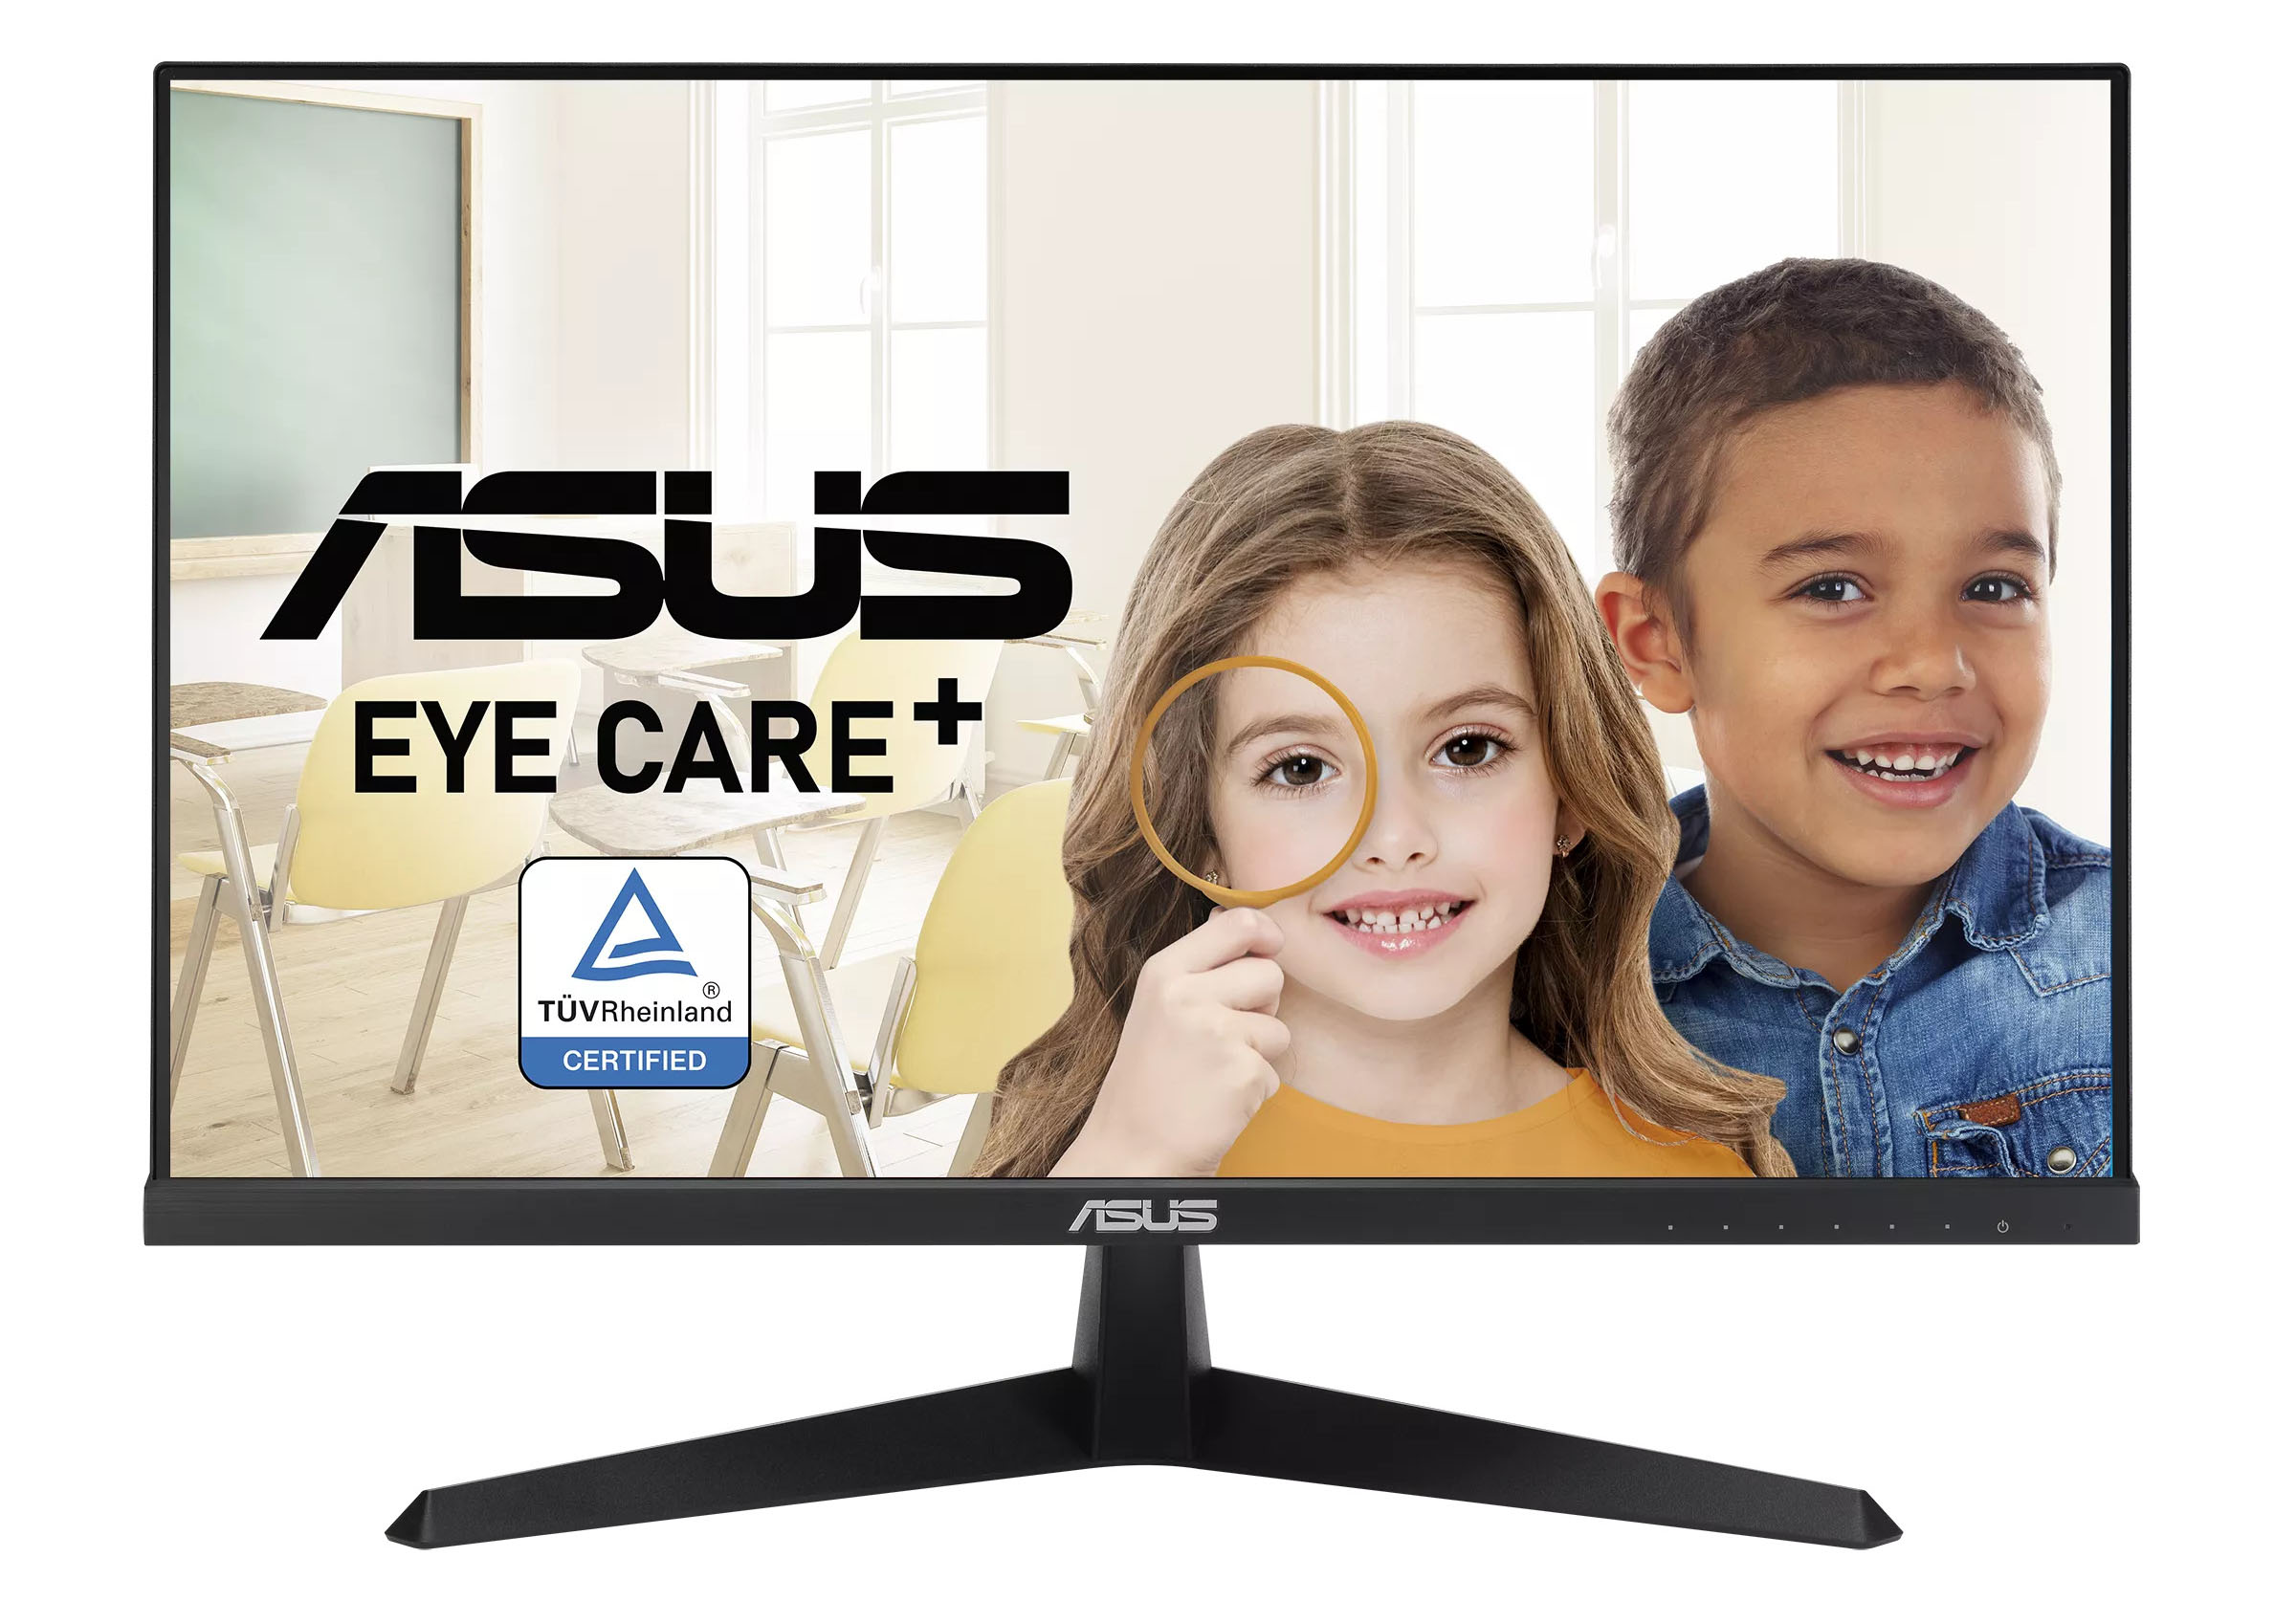 Monitor Asus 27" VY279HE IPS FHD 75Hz 1ms FreeSync